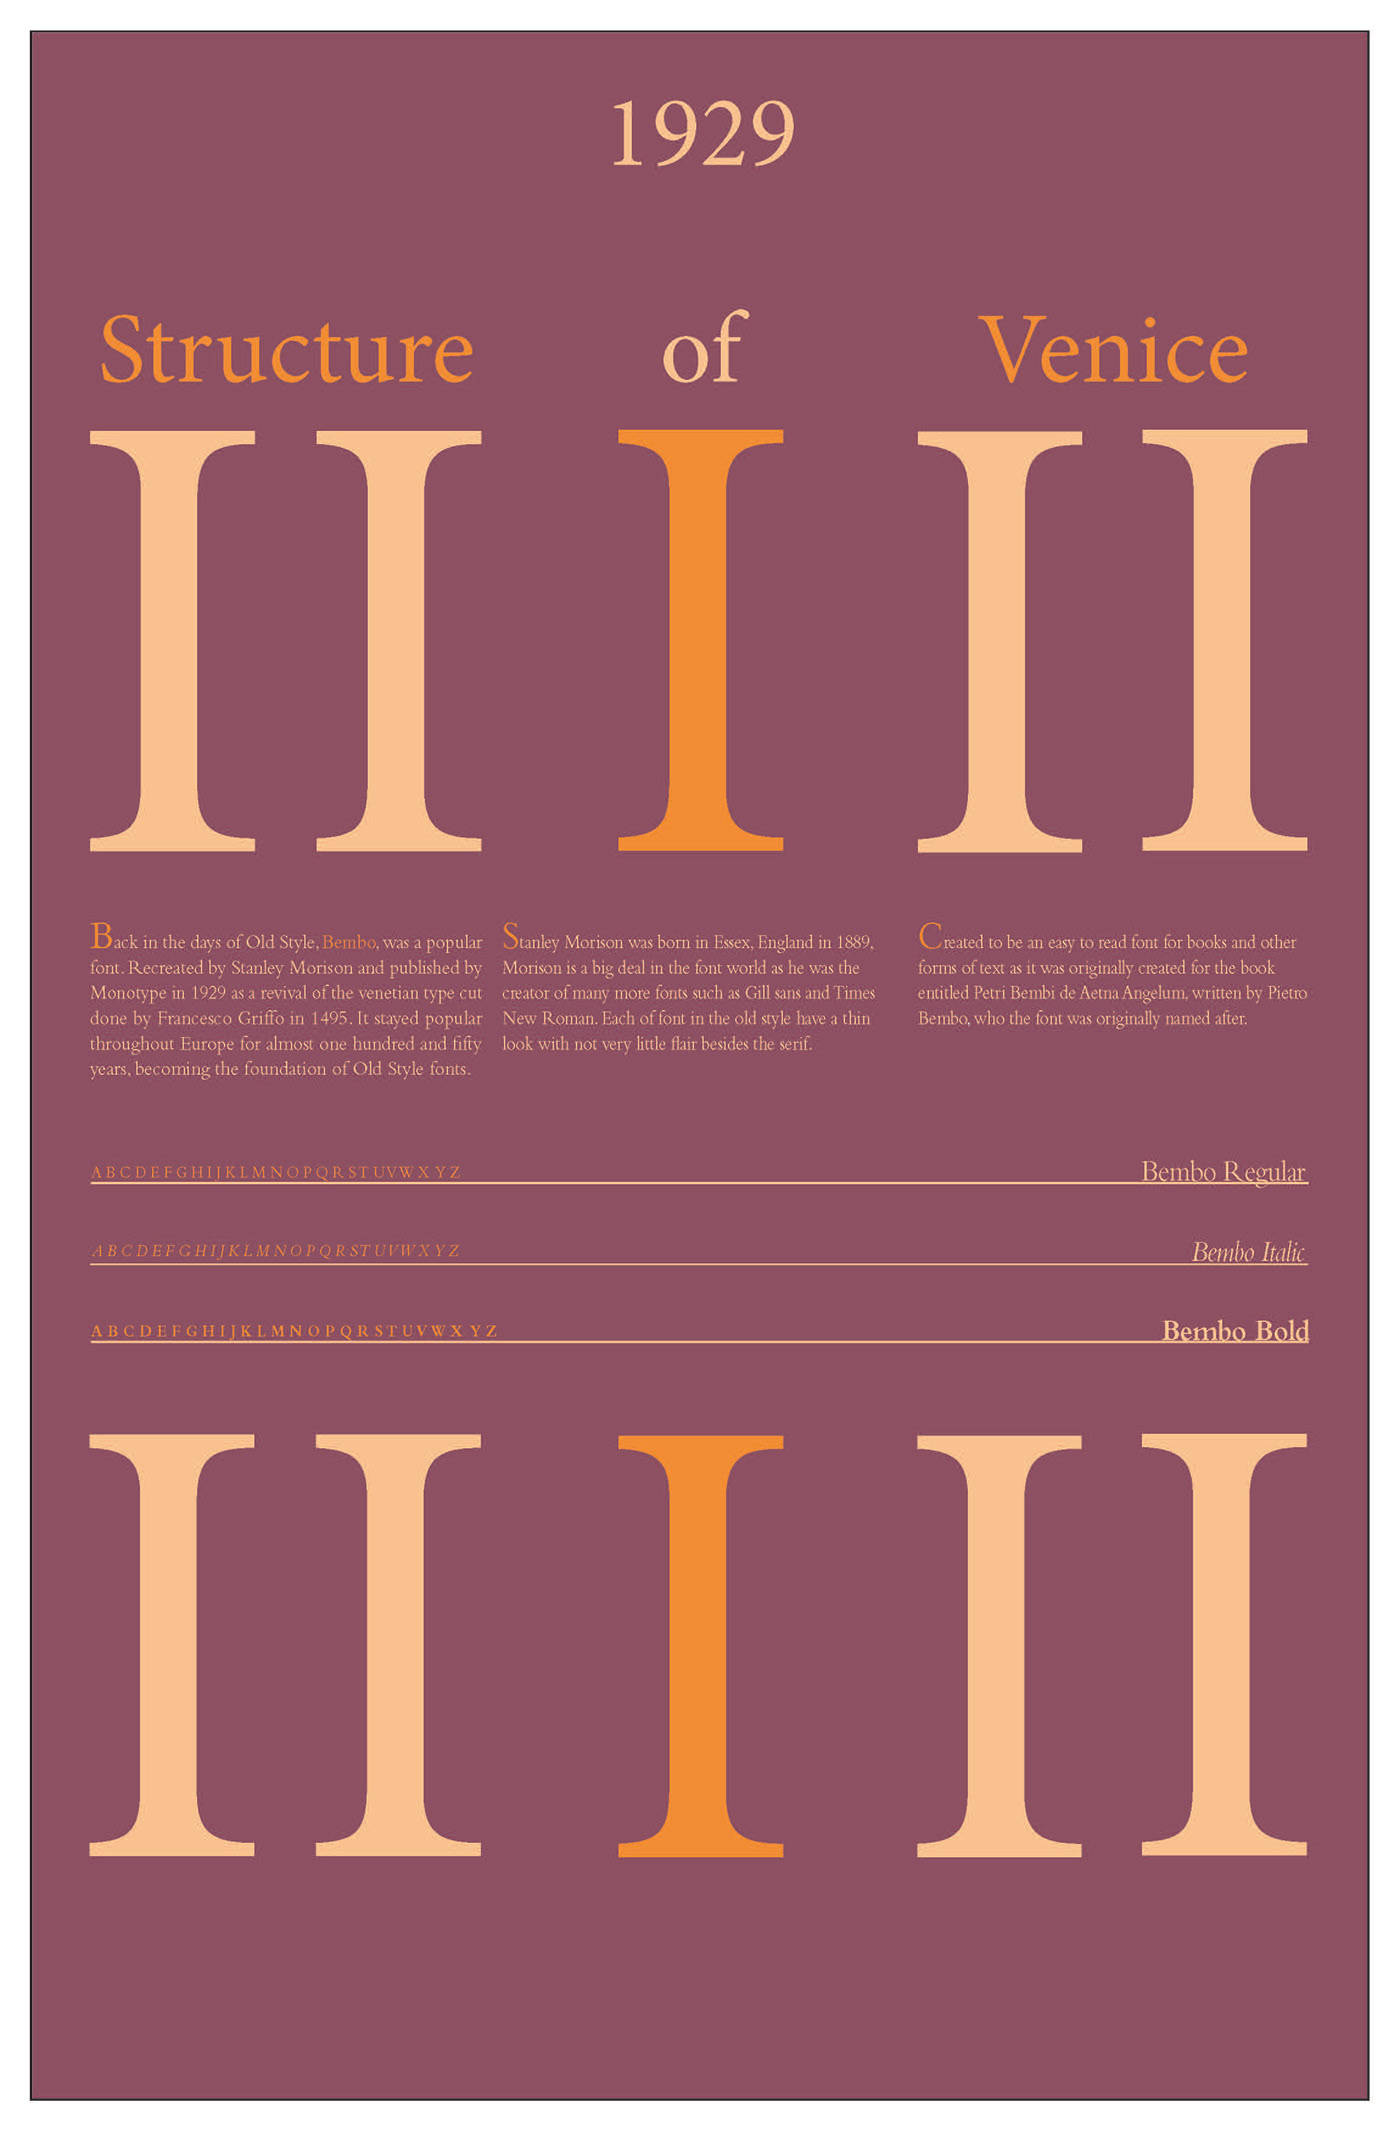 Typeface Bembo poster Venice InDesign structure type poster